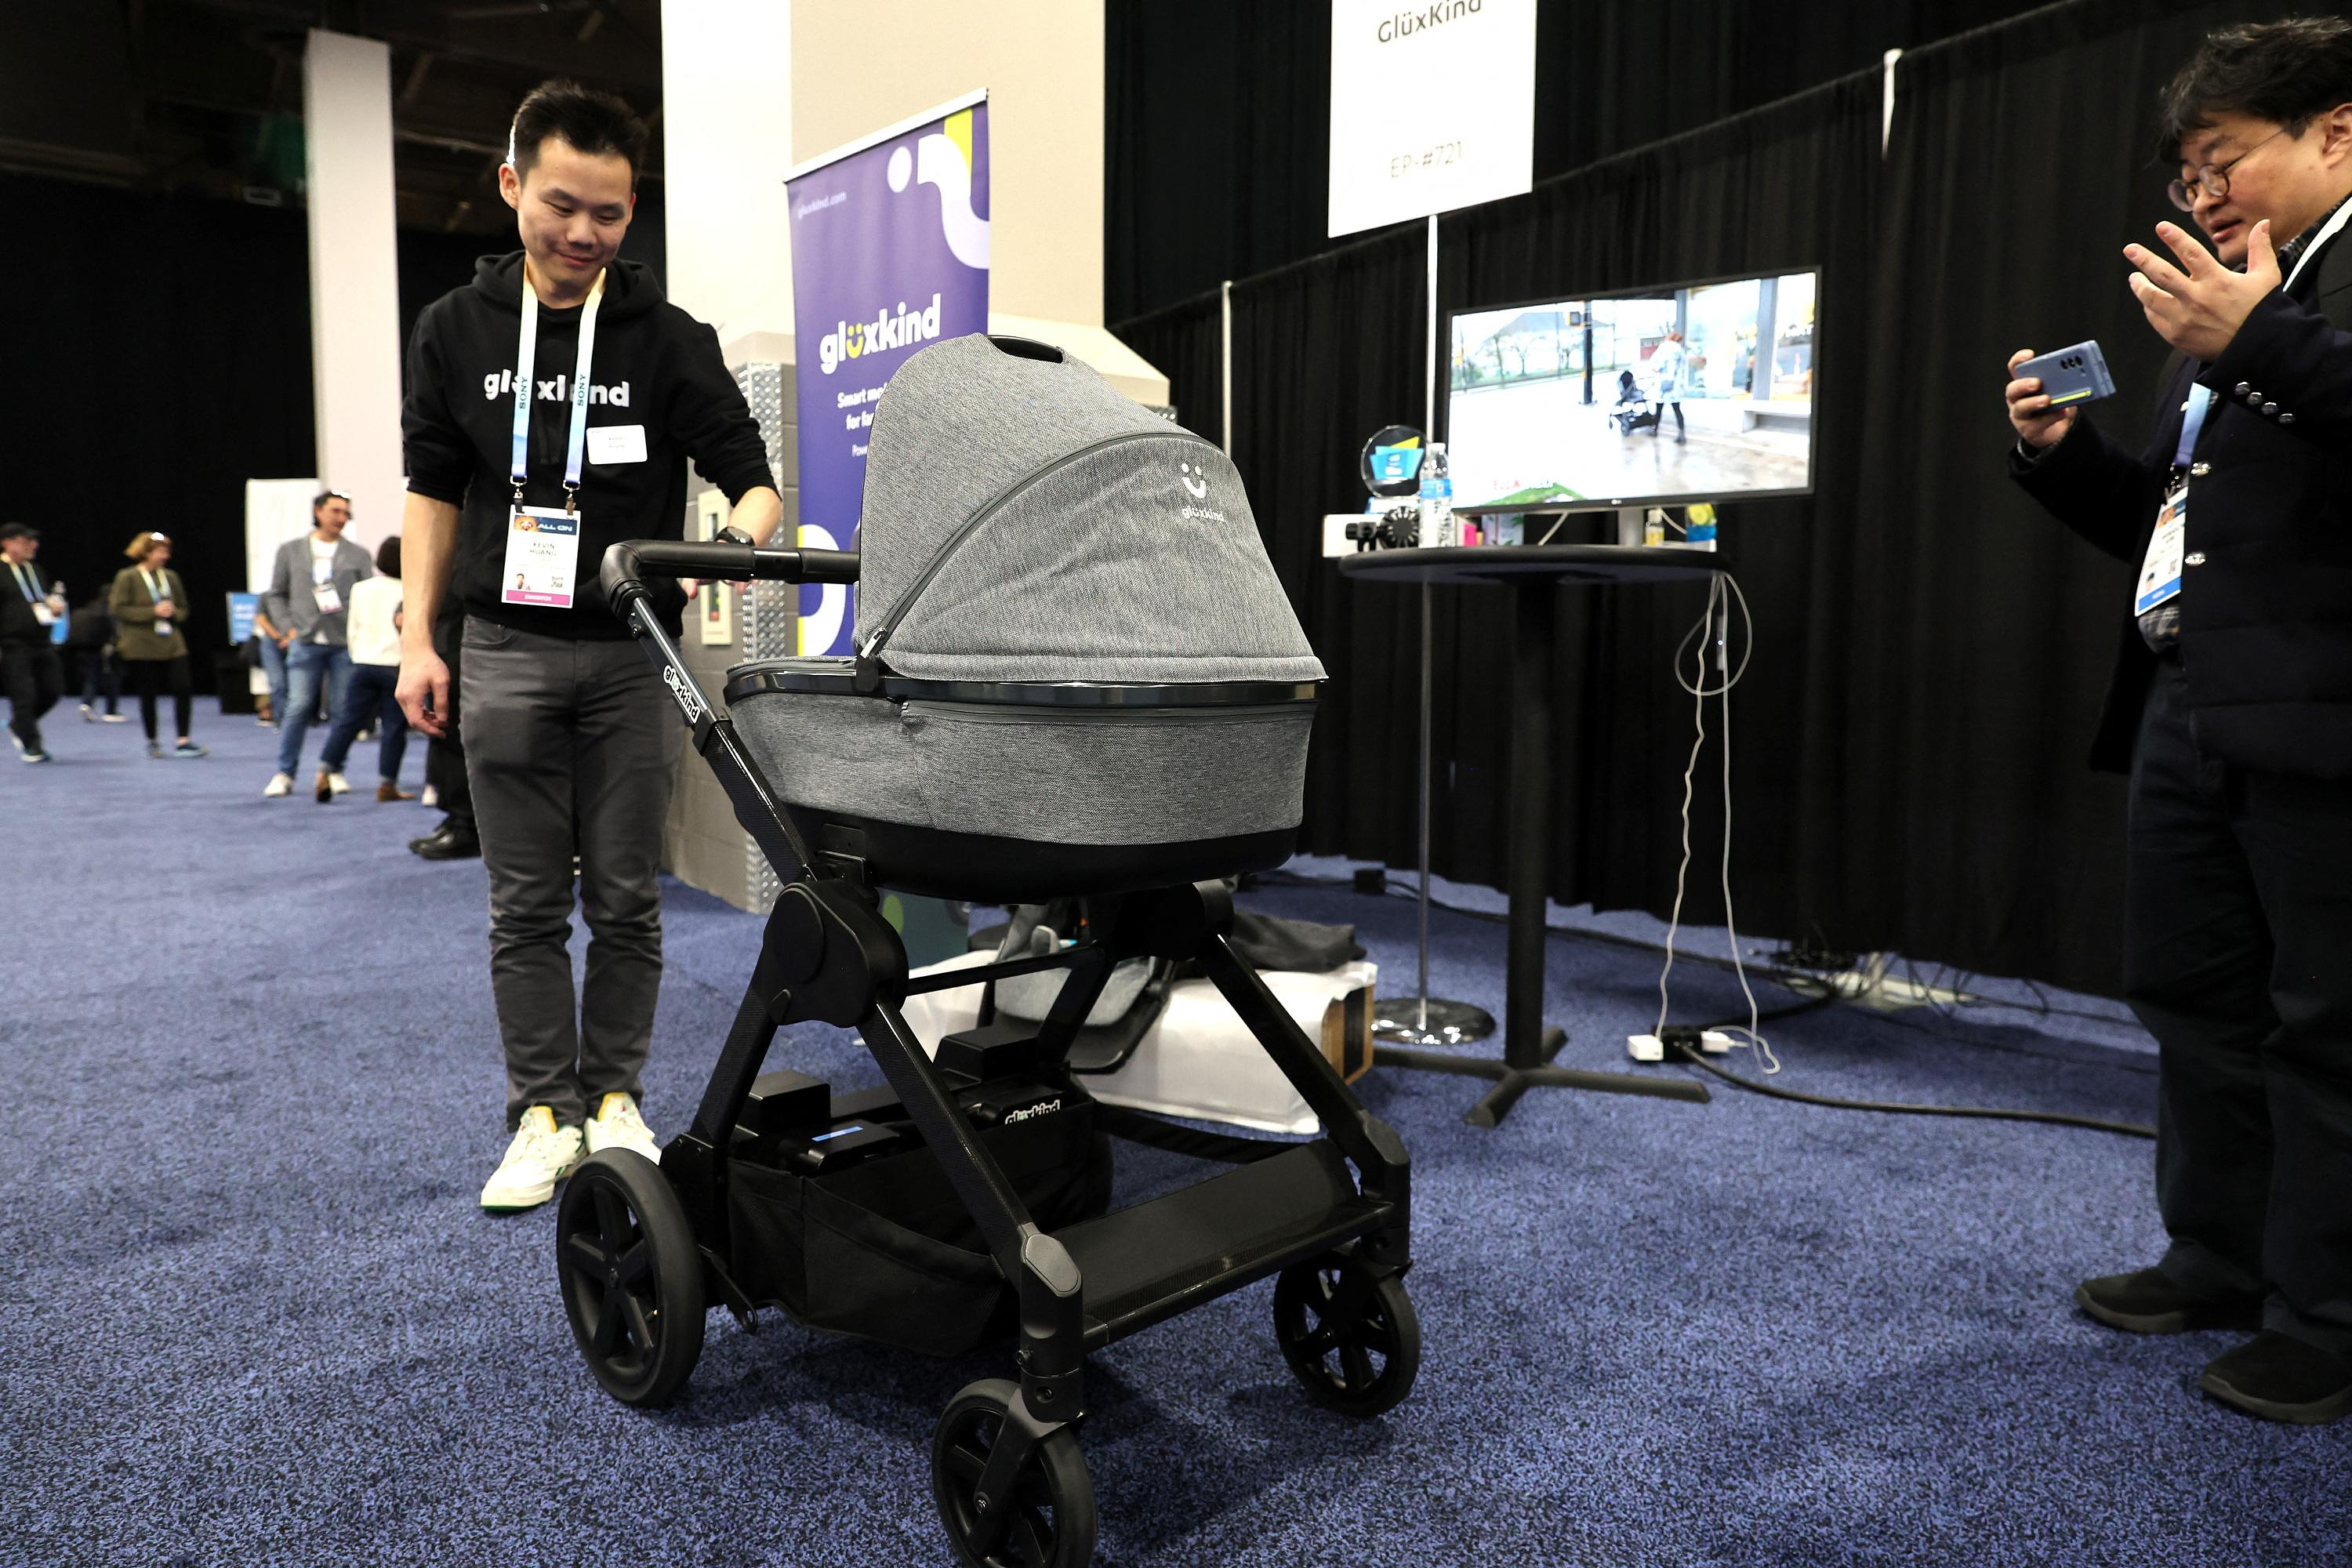 At CES in Las Vegas, tech diagnoses diseases and rocks babies thanks to AI